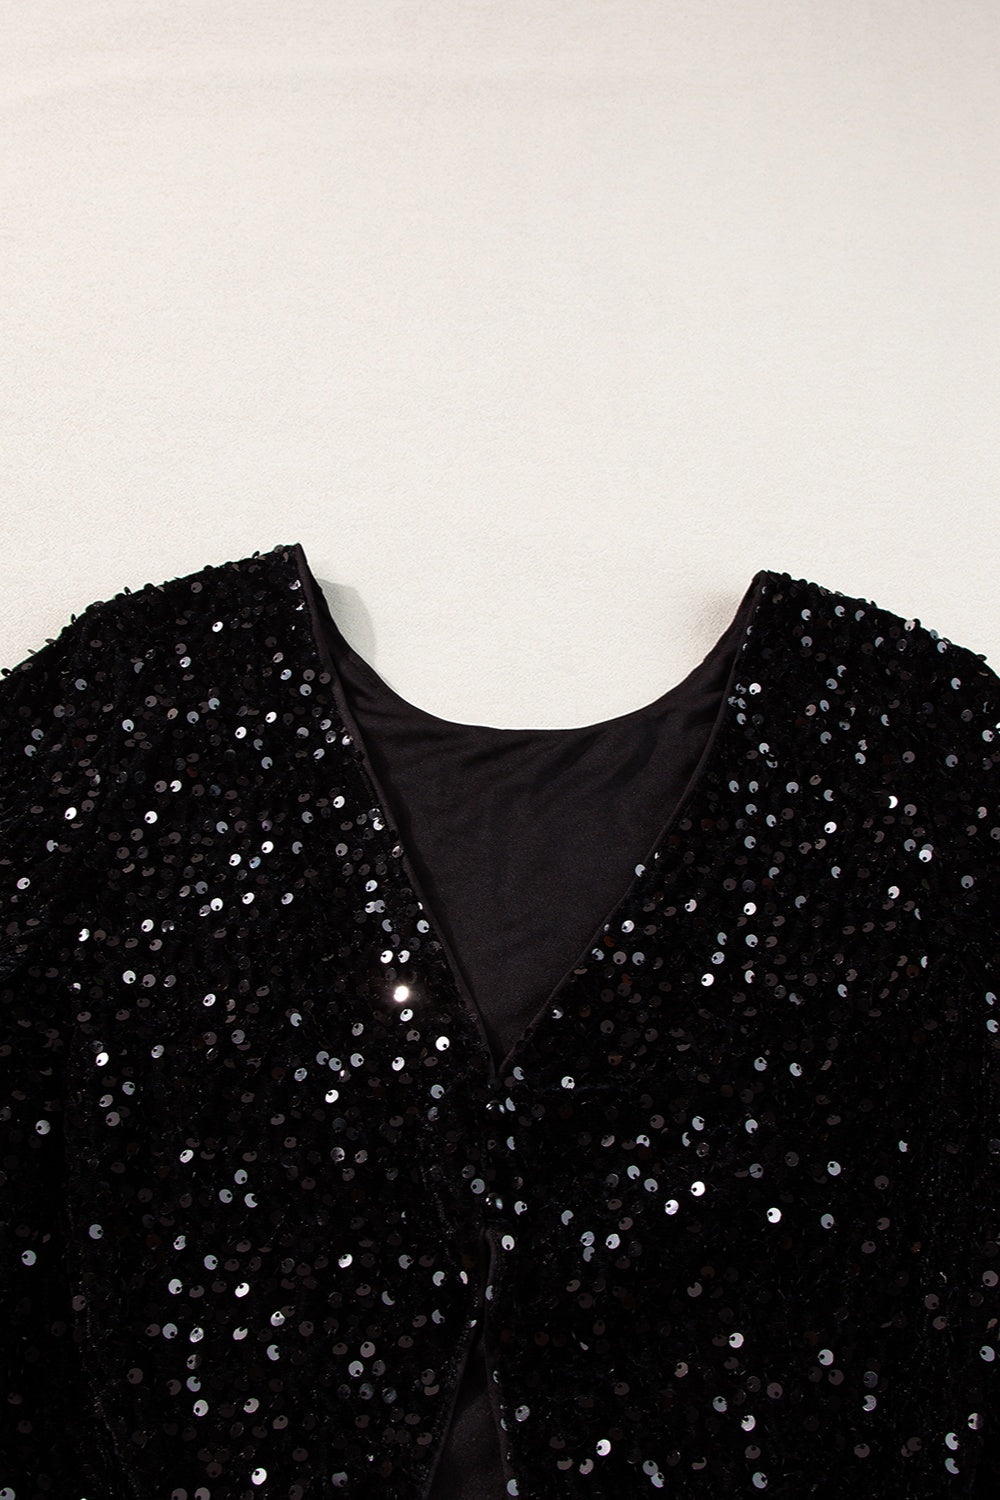 Sequin Round Neck Long Sleeve Blouse